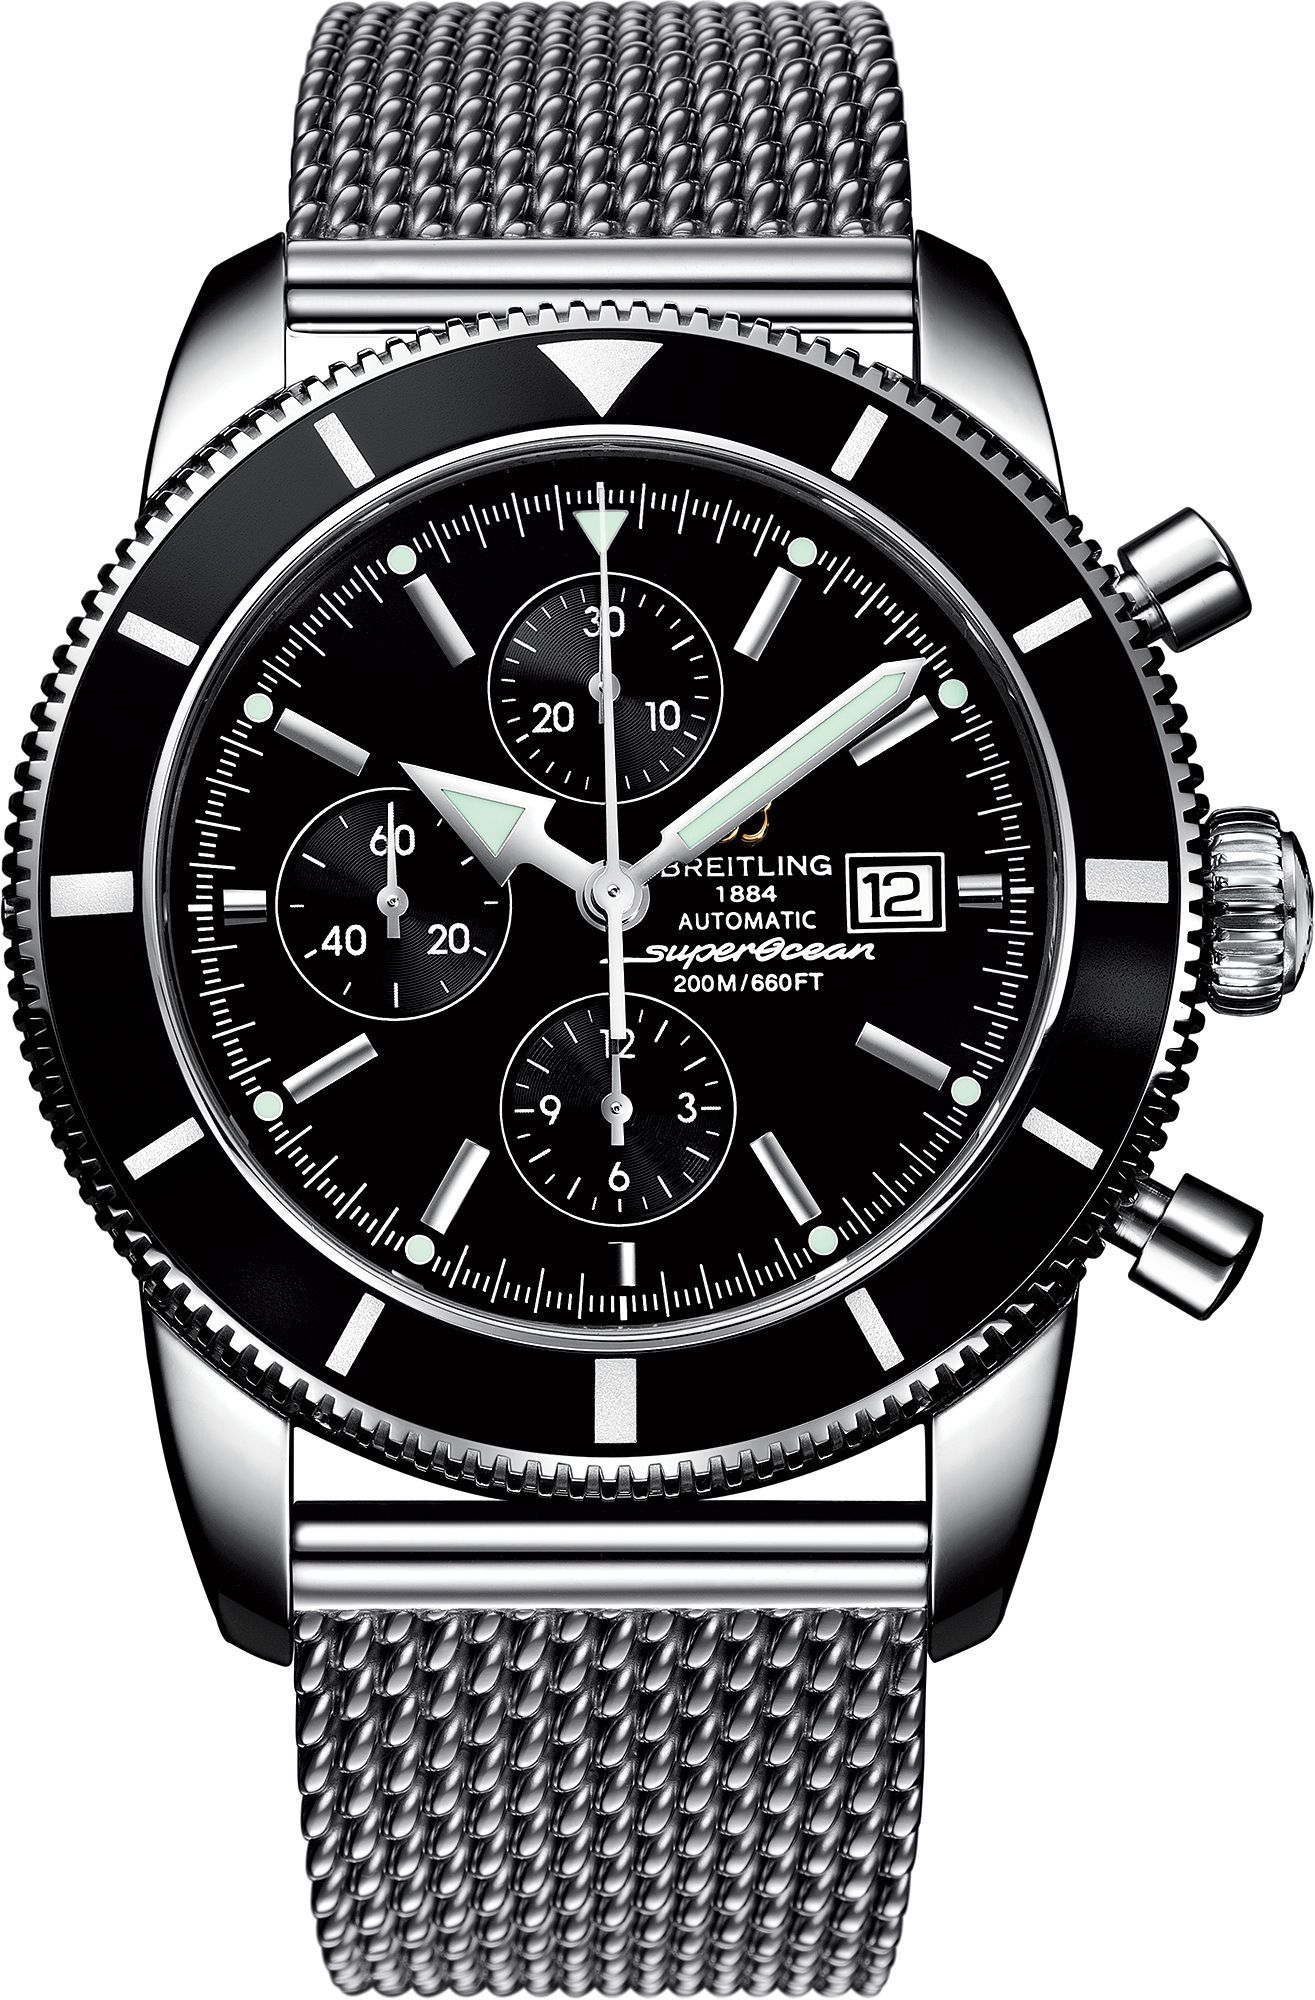 Breitling Superocean Heritage Chronographe 46 46 mm Watch in Black Dial For Men - 1